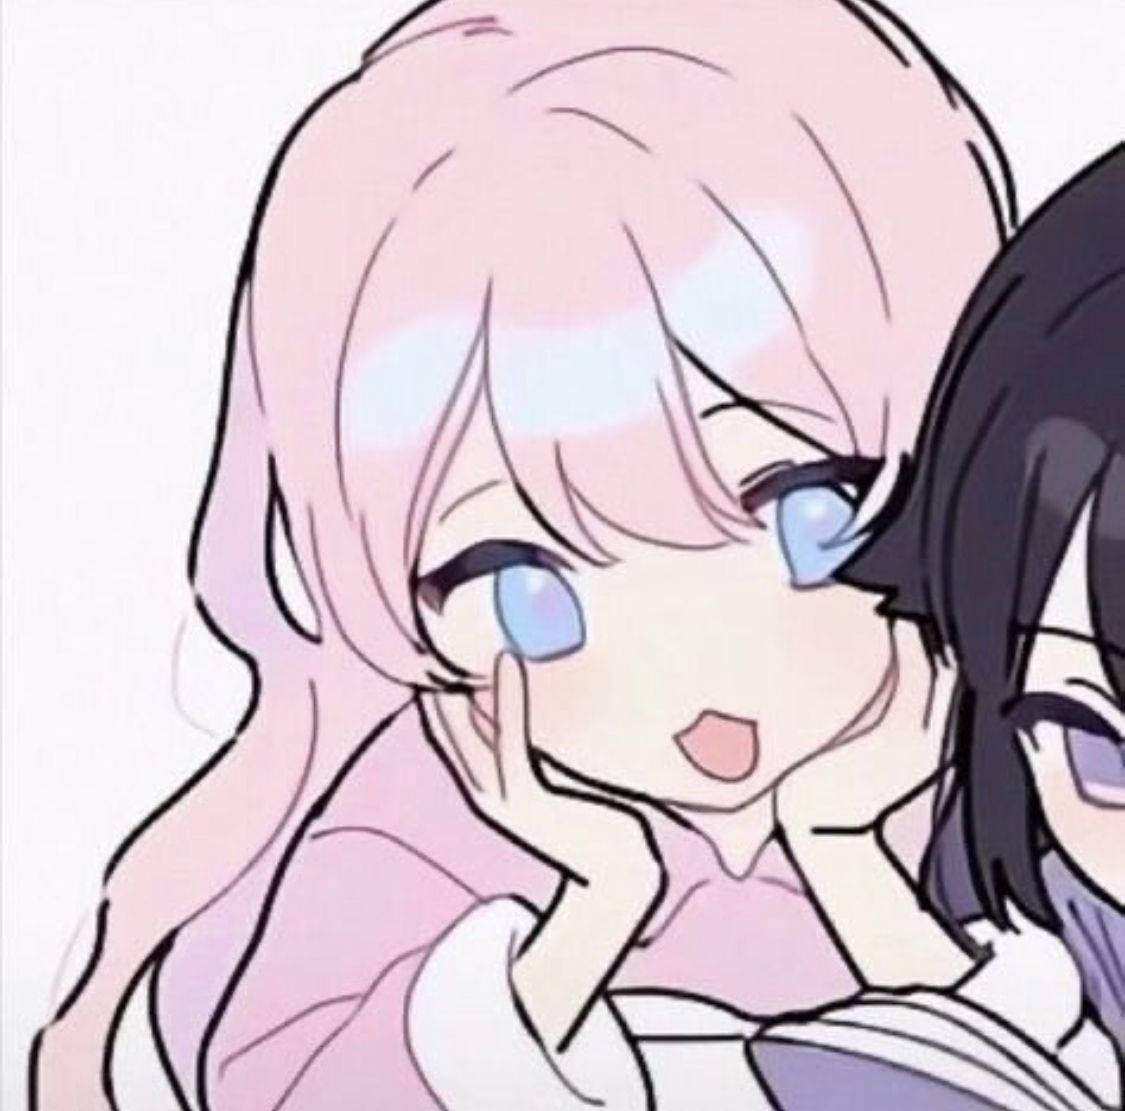 Matching Pfp Anime Couple Girls : About Love In Matching Icons For U N Bae  By Dream Girl /